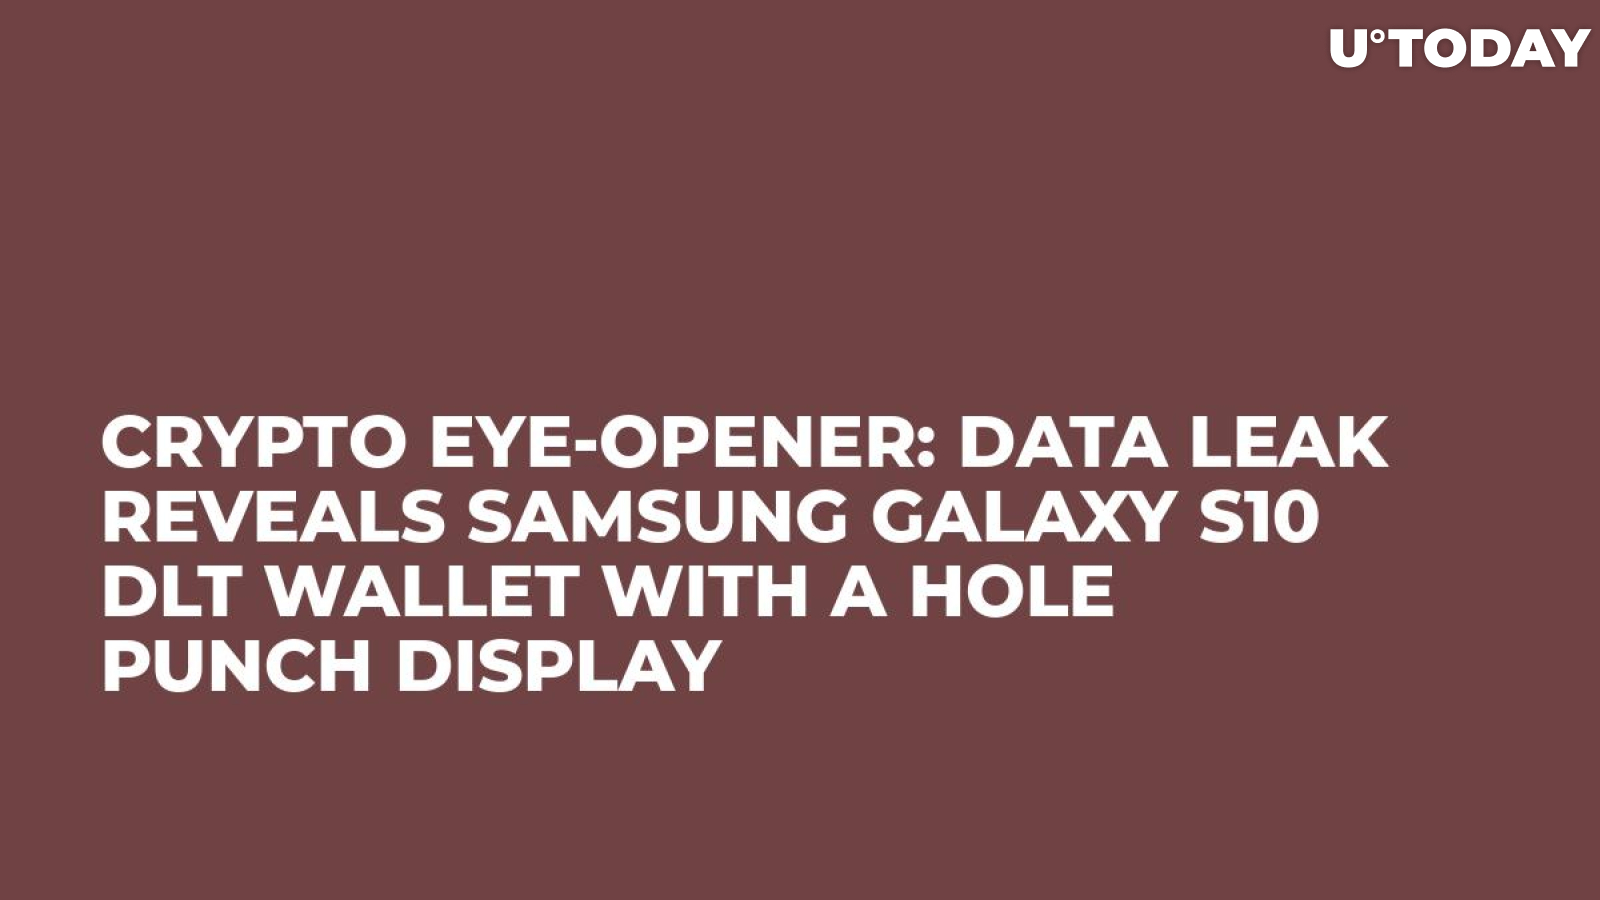 Crypto Eye-Opener: Data Leak Reveals Samsung Galaxy S10 DLT Wallet with a Hole Punch Display